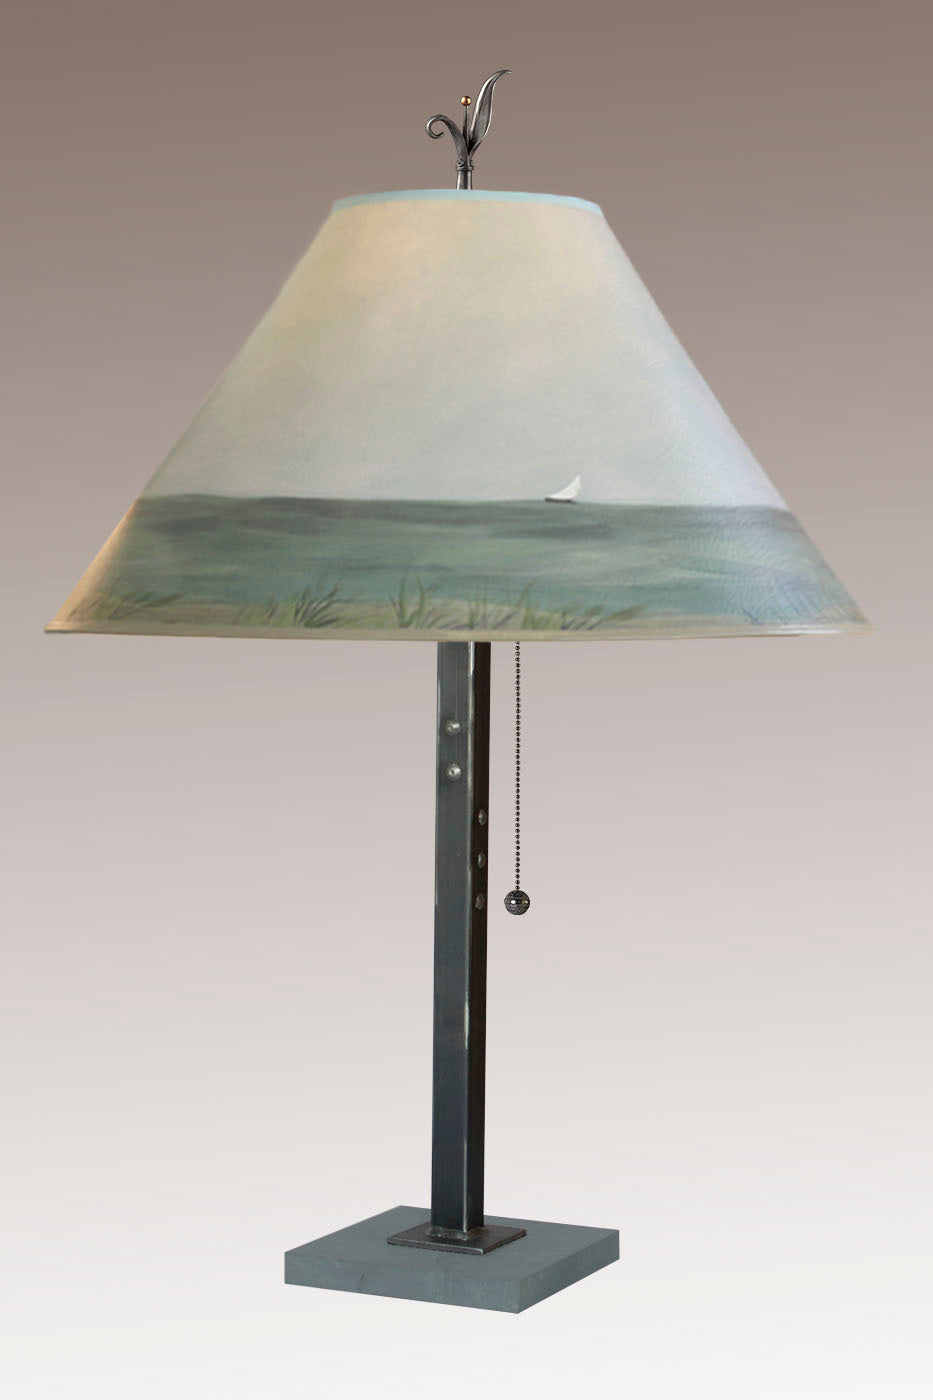 Janna Ugone & Co Table Lamps Steel Table Lamp with Large Conical Shade in Shore